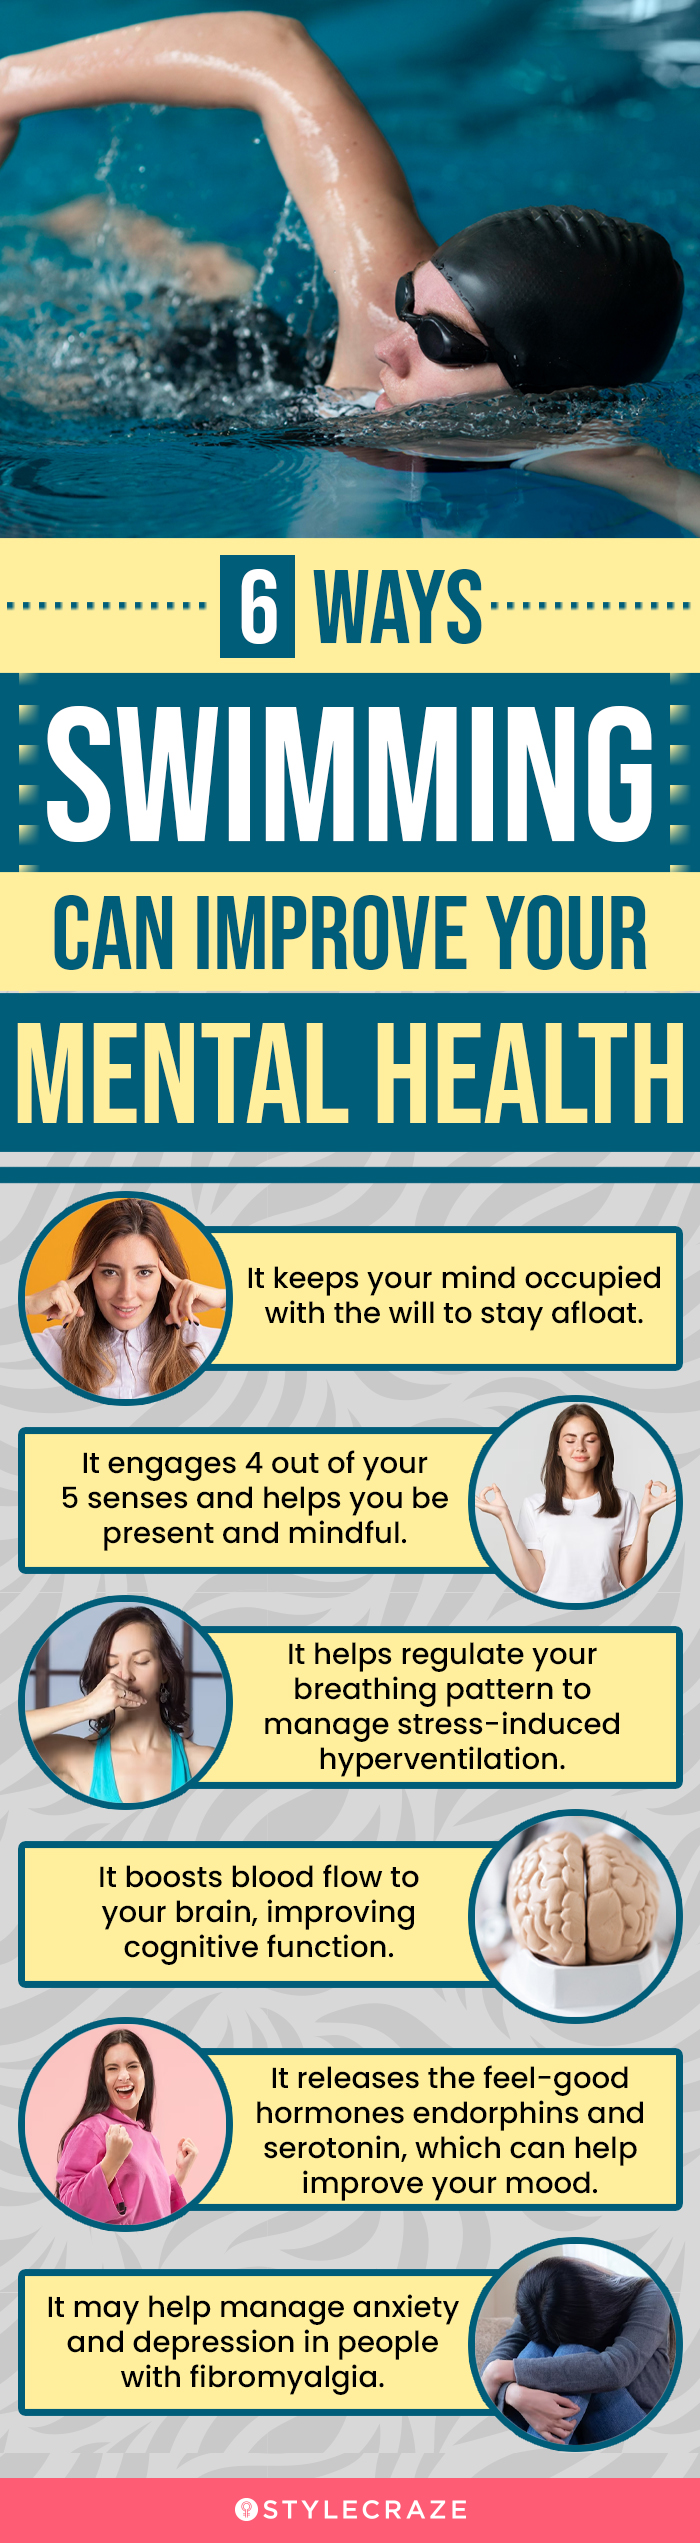 6 ways swimming can improve your mental health (infographic)